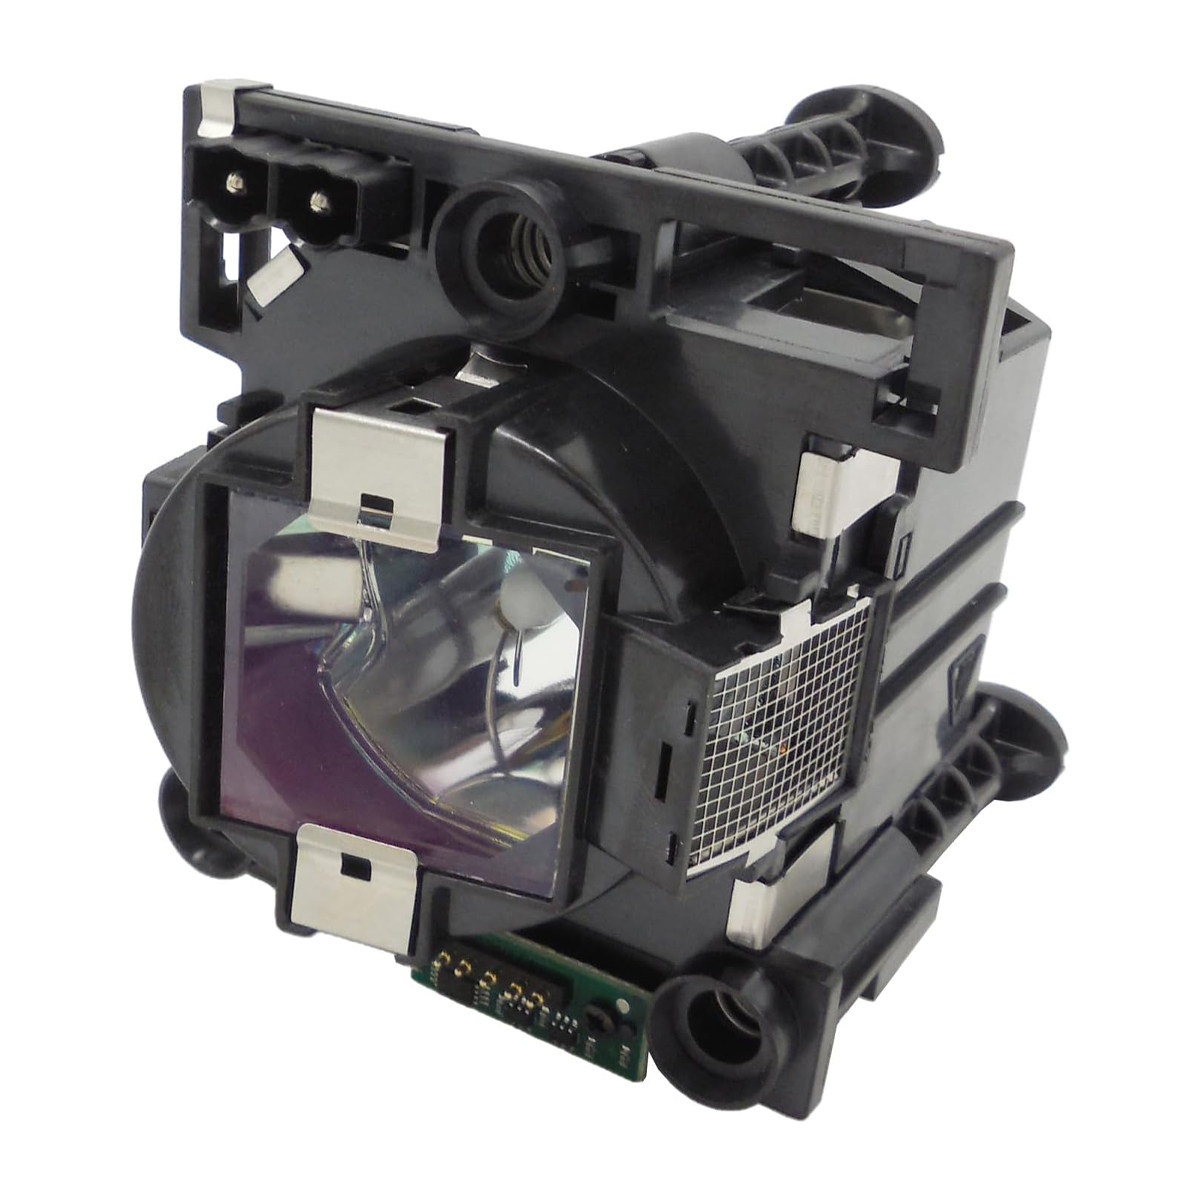 Replacement Projector lamp 105-824 For DIGITAL PROJECTION dVision 30-1080P/30-1080P-XL/30HD